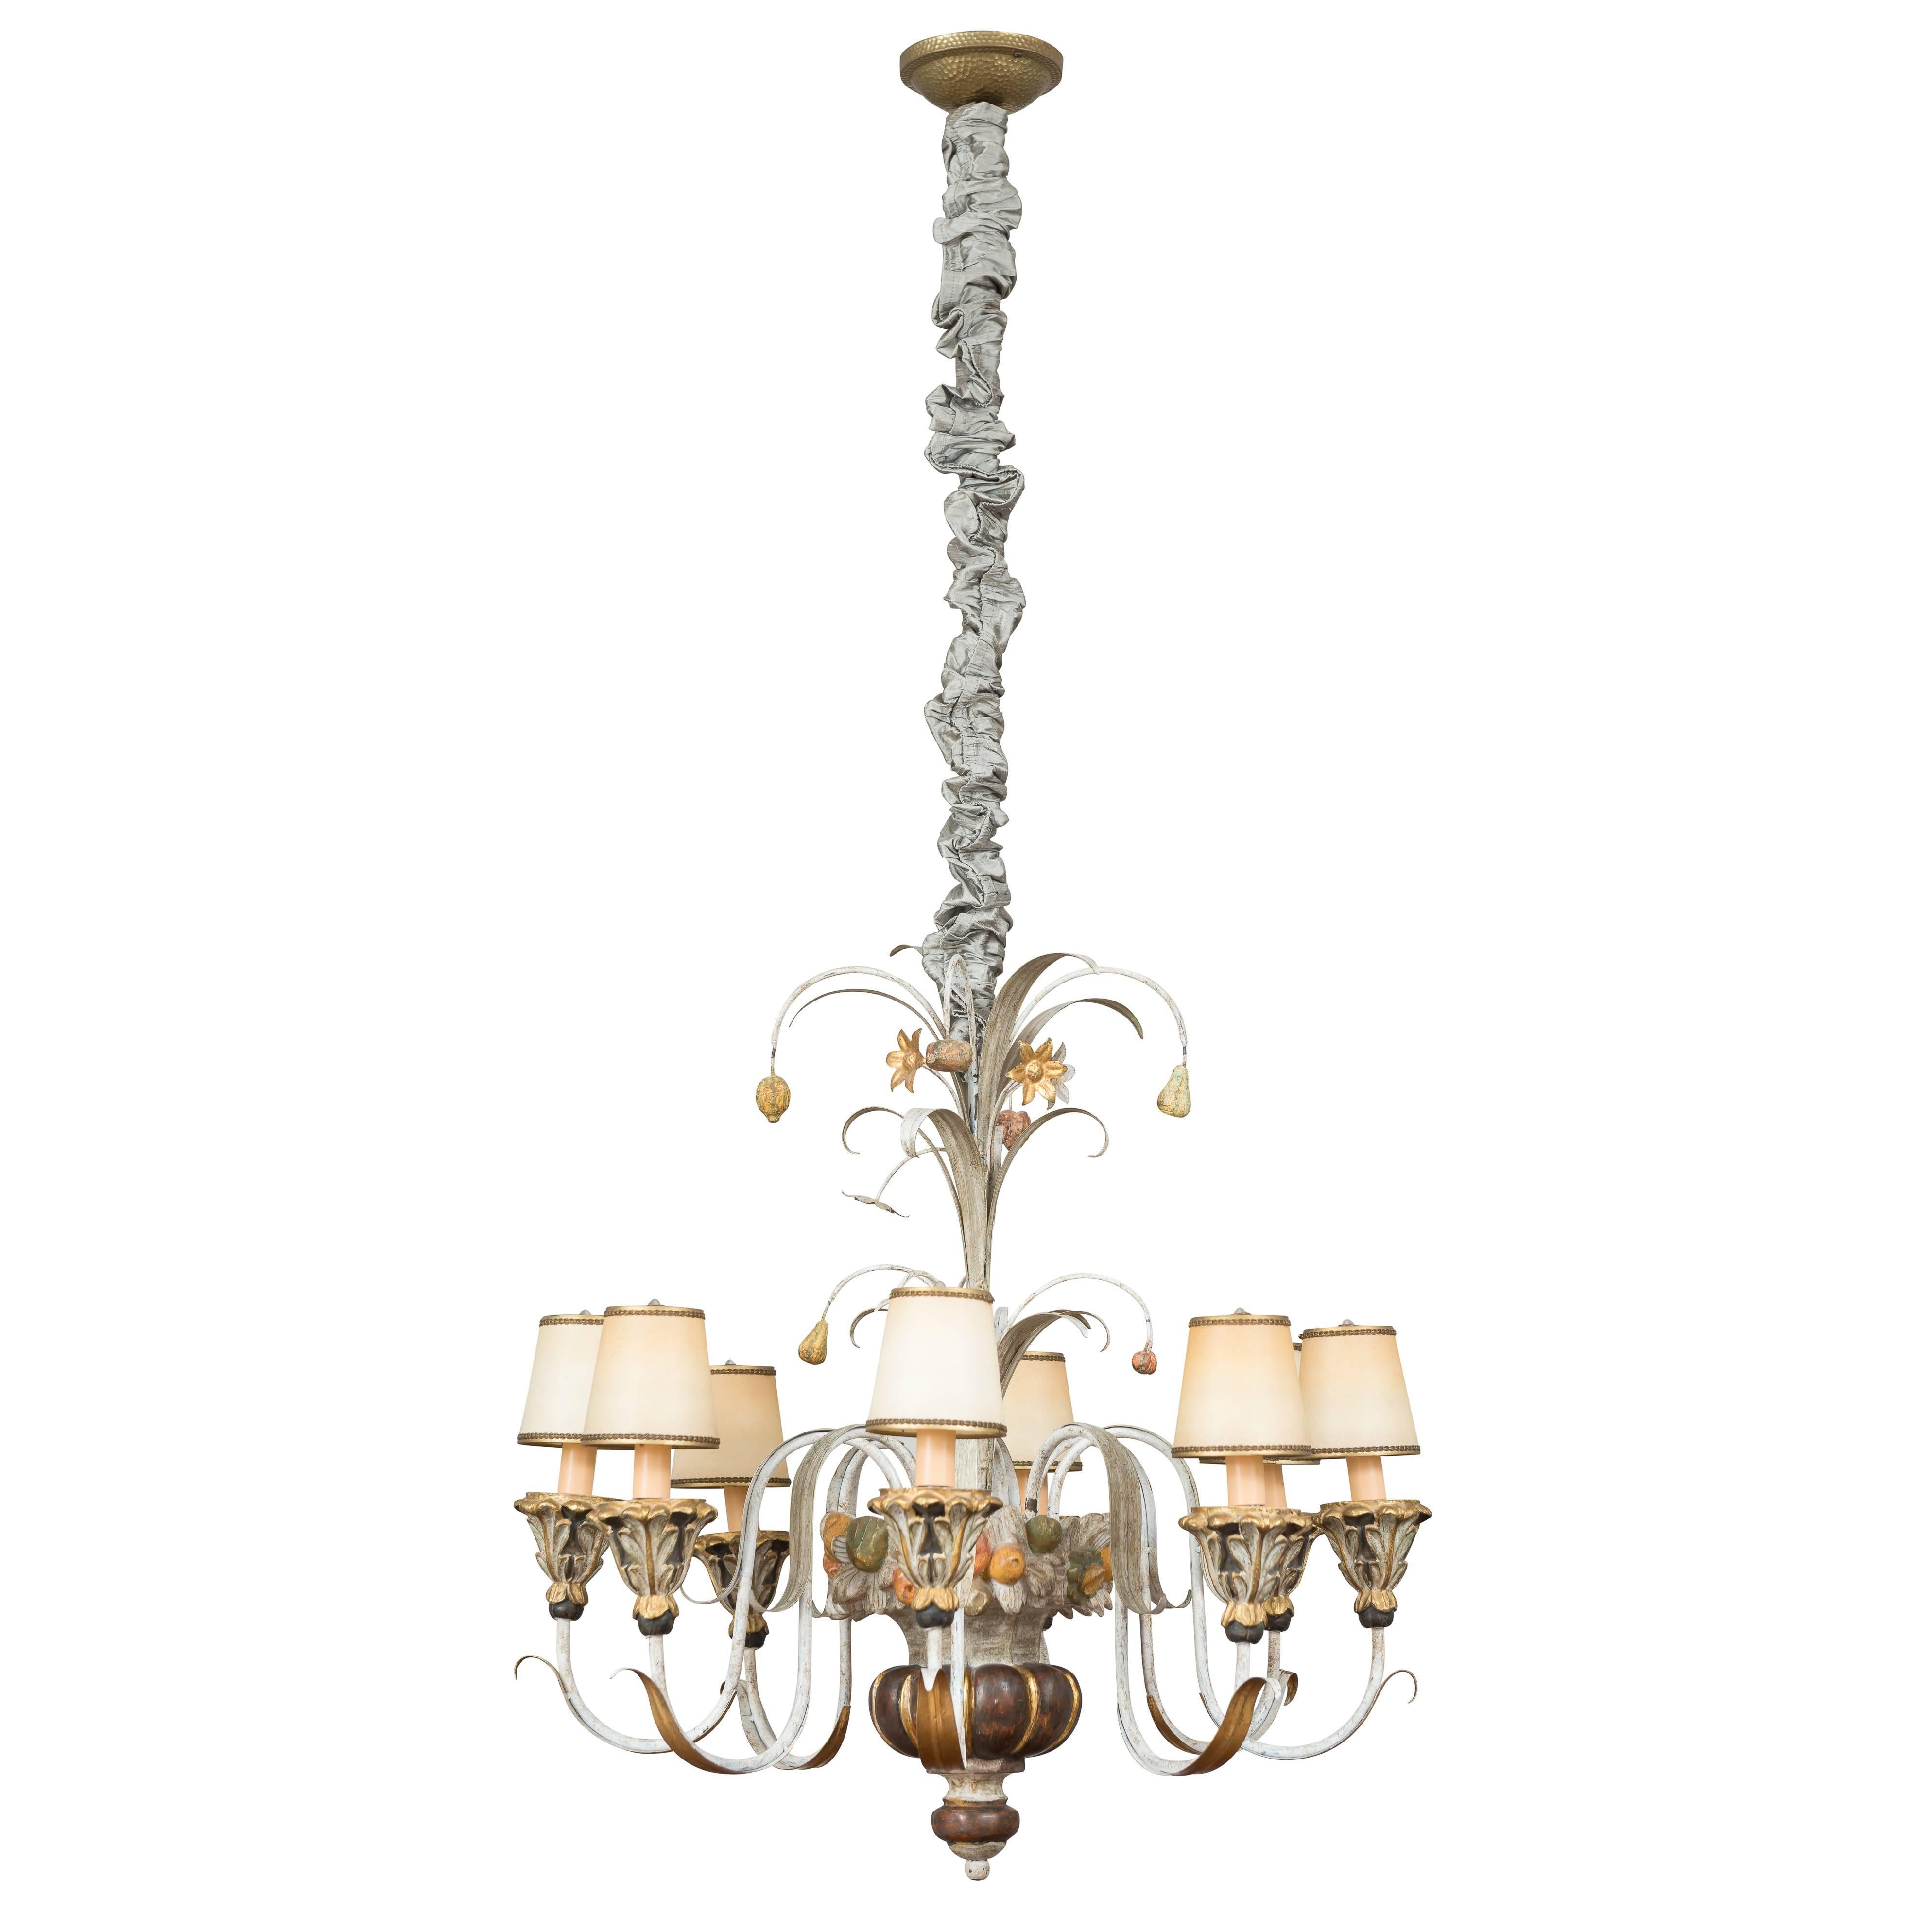 Eight-Light Carved Wood Venetian Chandelier with Metal Detail